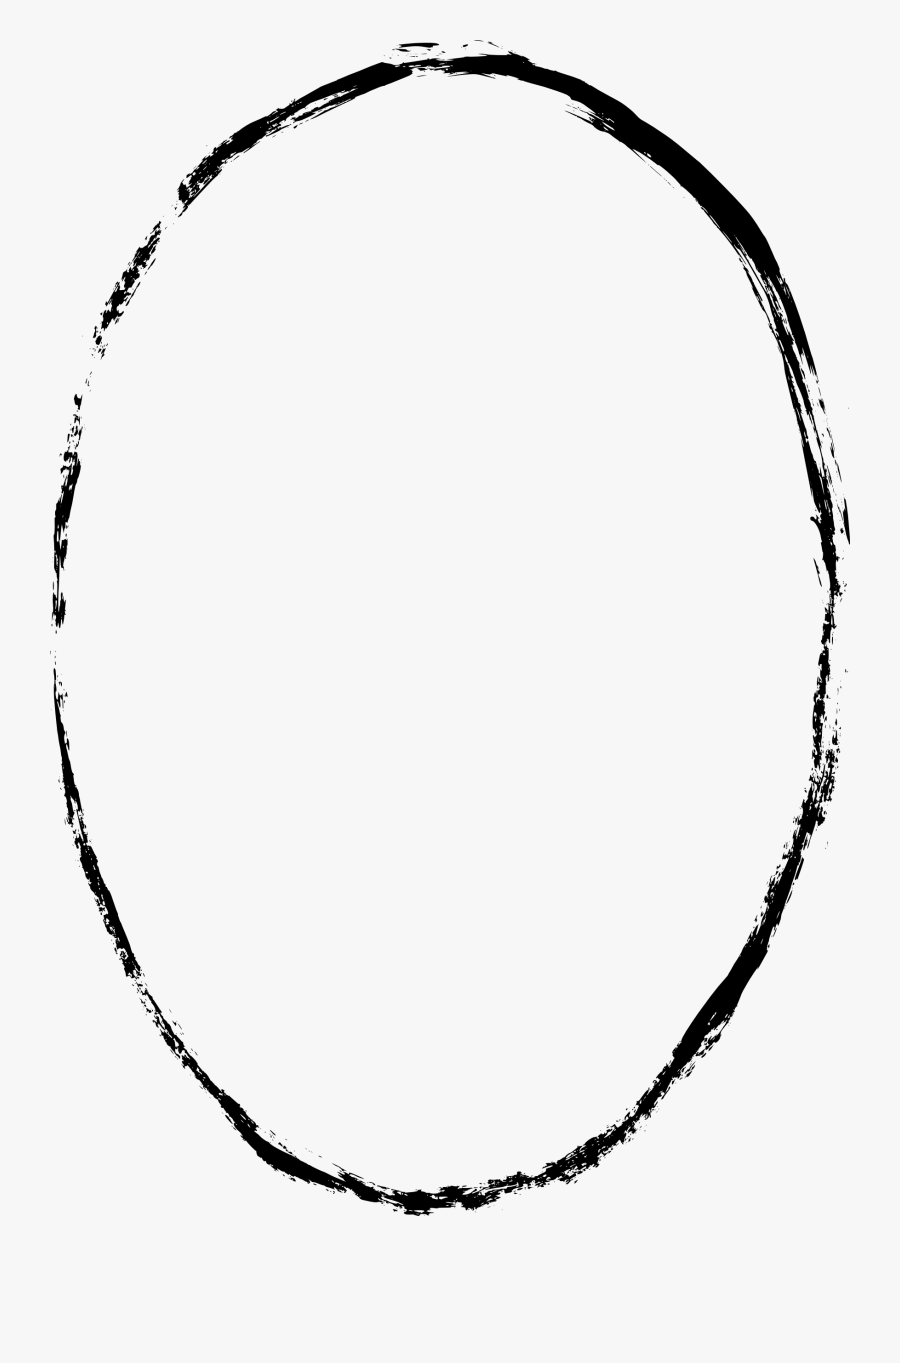 Drawing Oval Clip Art - Oval Brush Stroke Png, Transparent Clipart